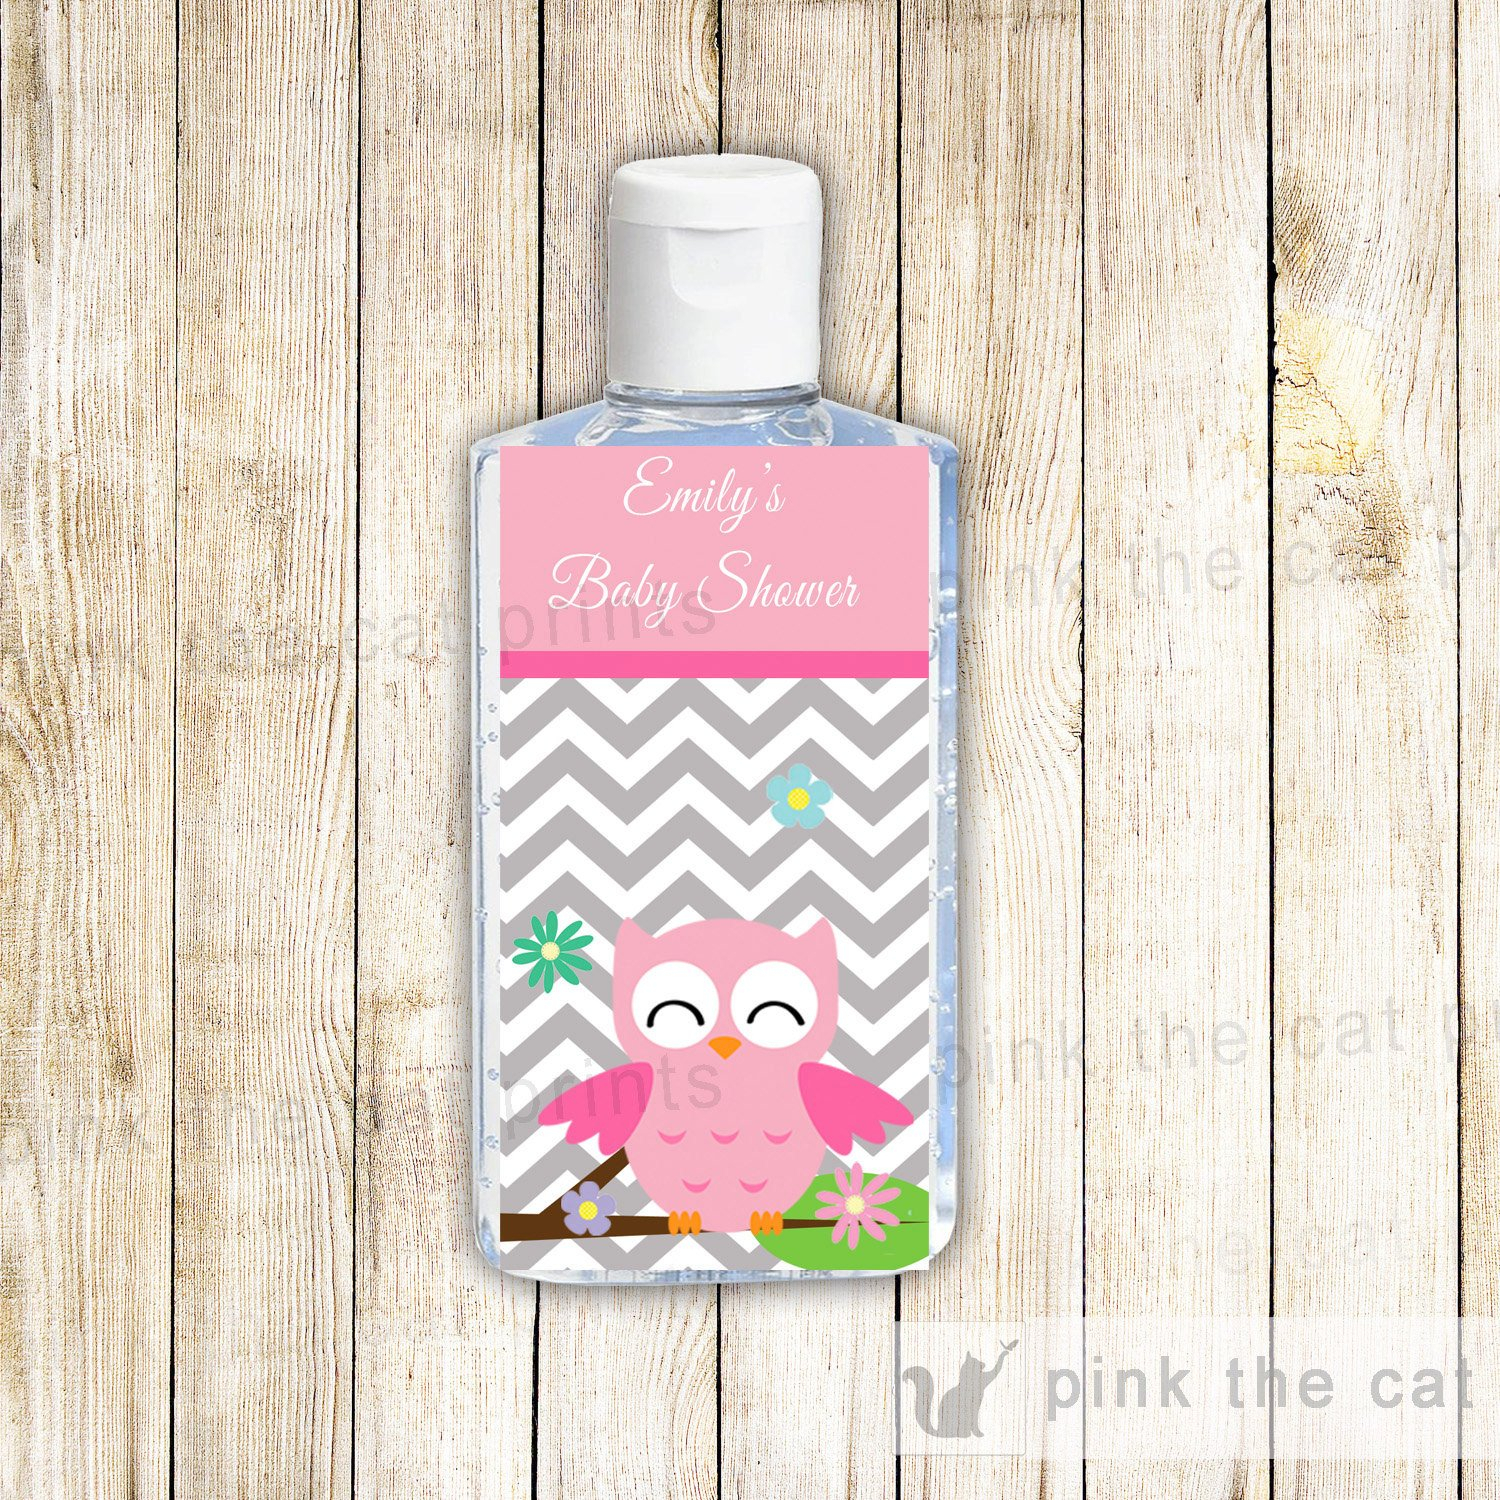 Personalized Hand Sanitizer Label Template Hand Sanitizer Throughout Hand Sanitizer Label Template